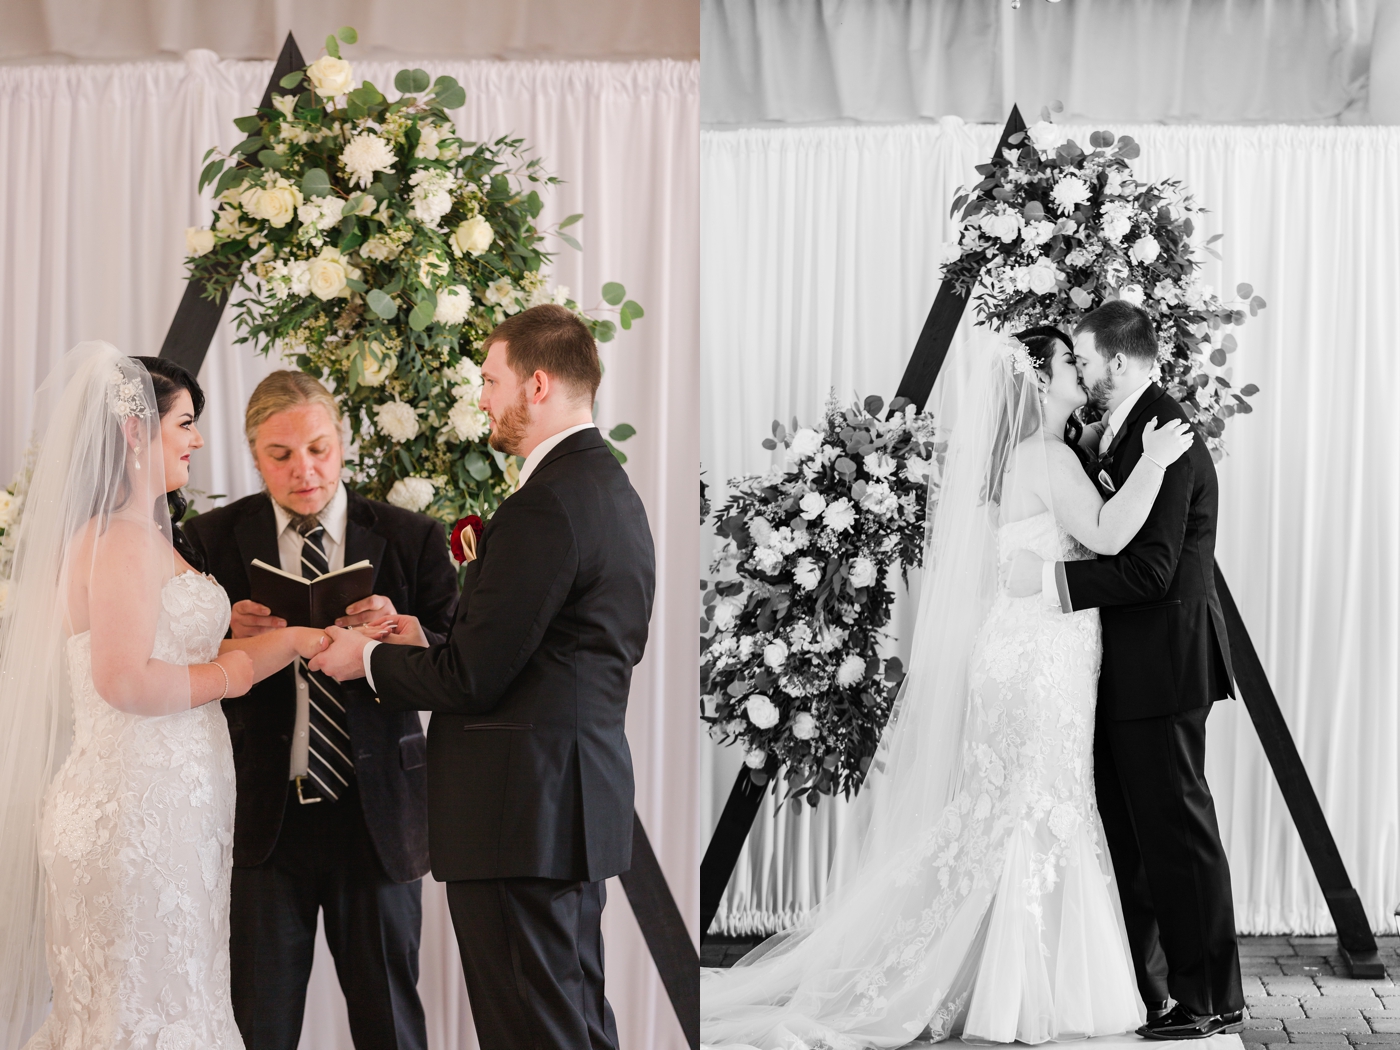 My 5 tips for photographing a wedding ceremony